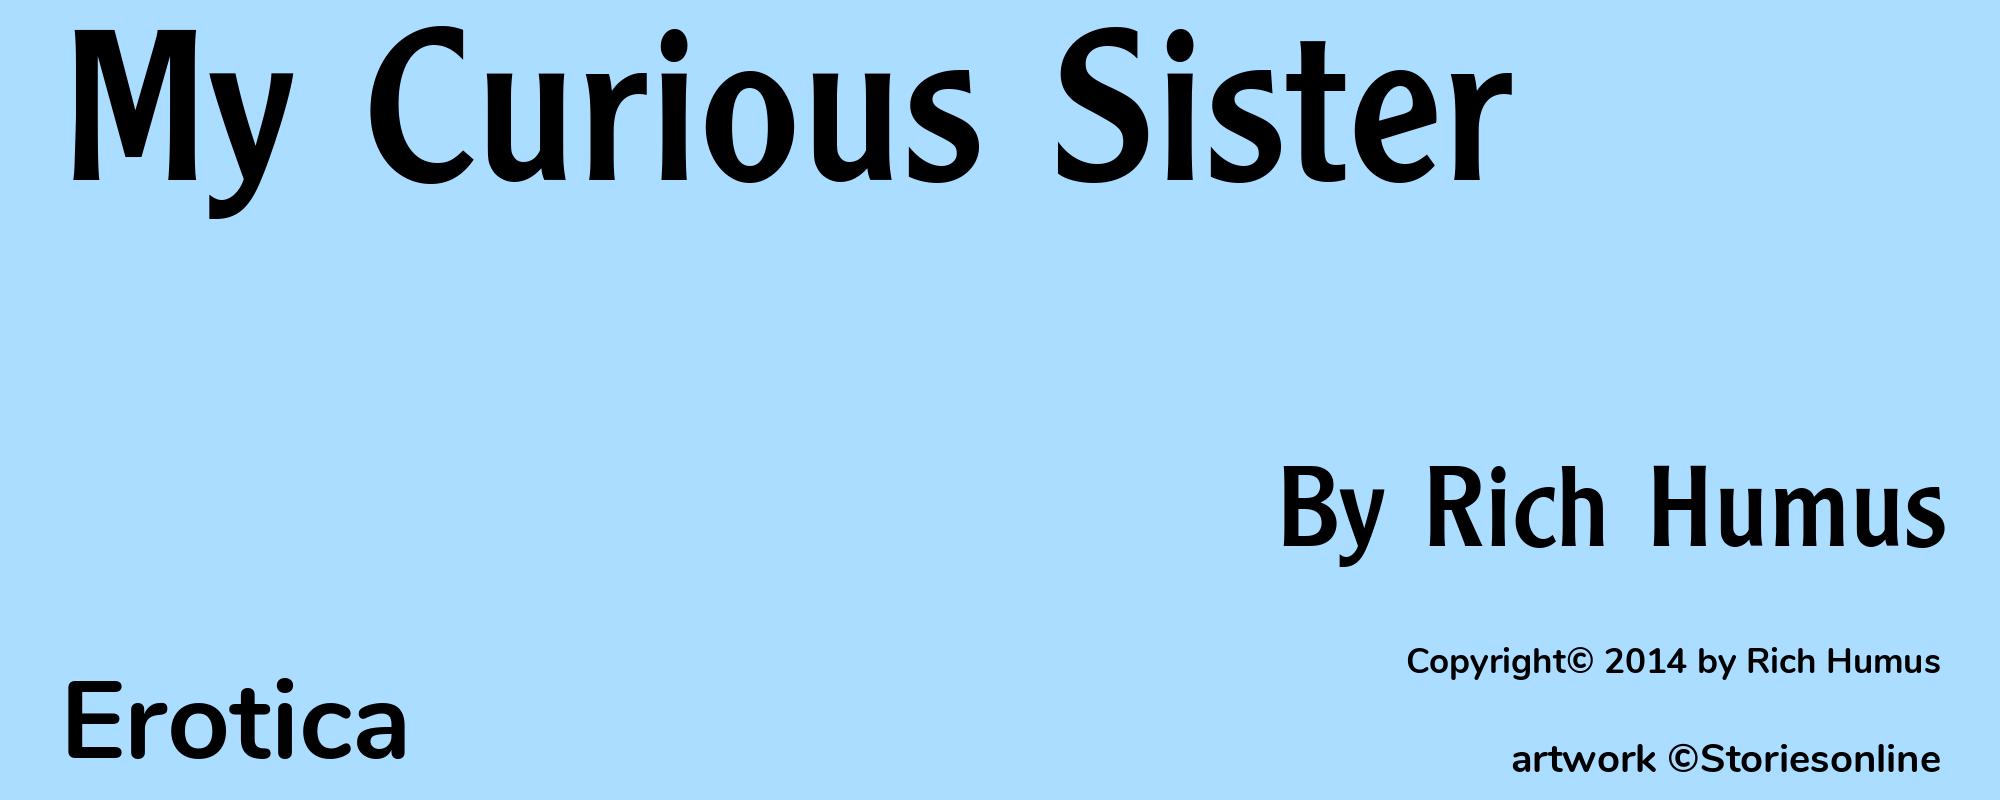 My Curious Sister - Cover